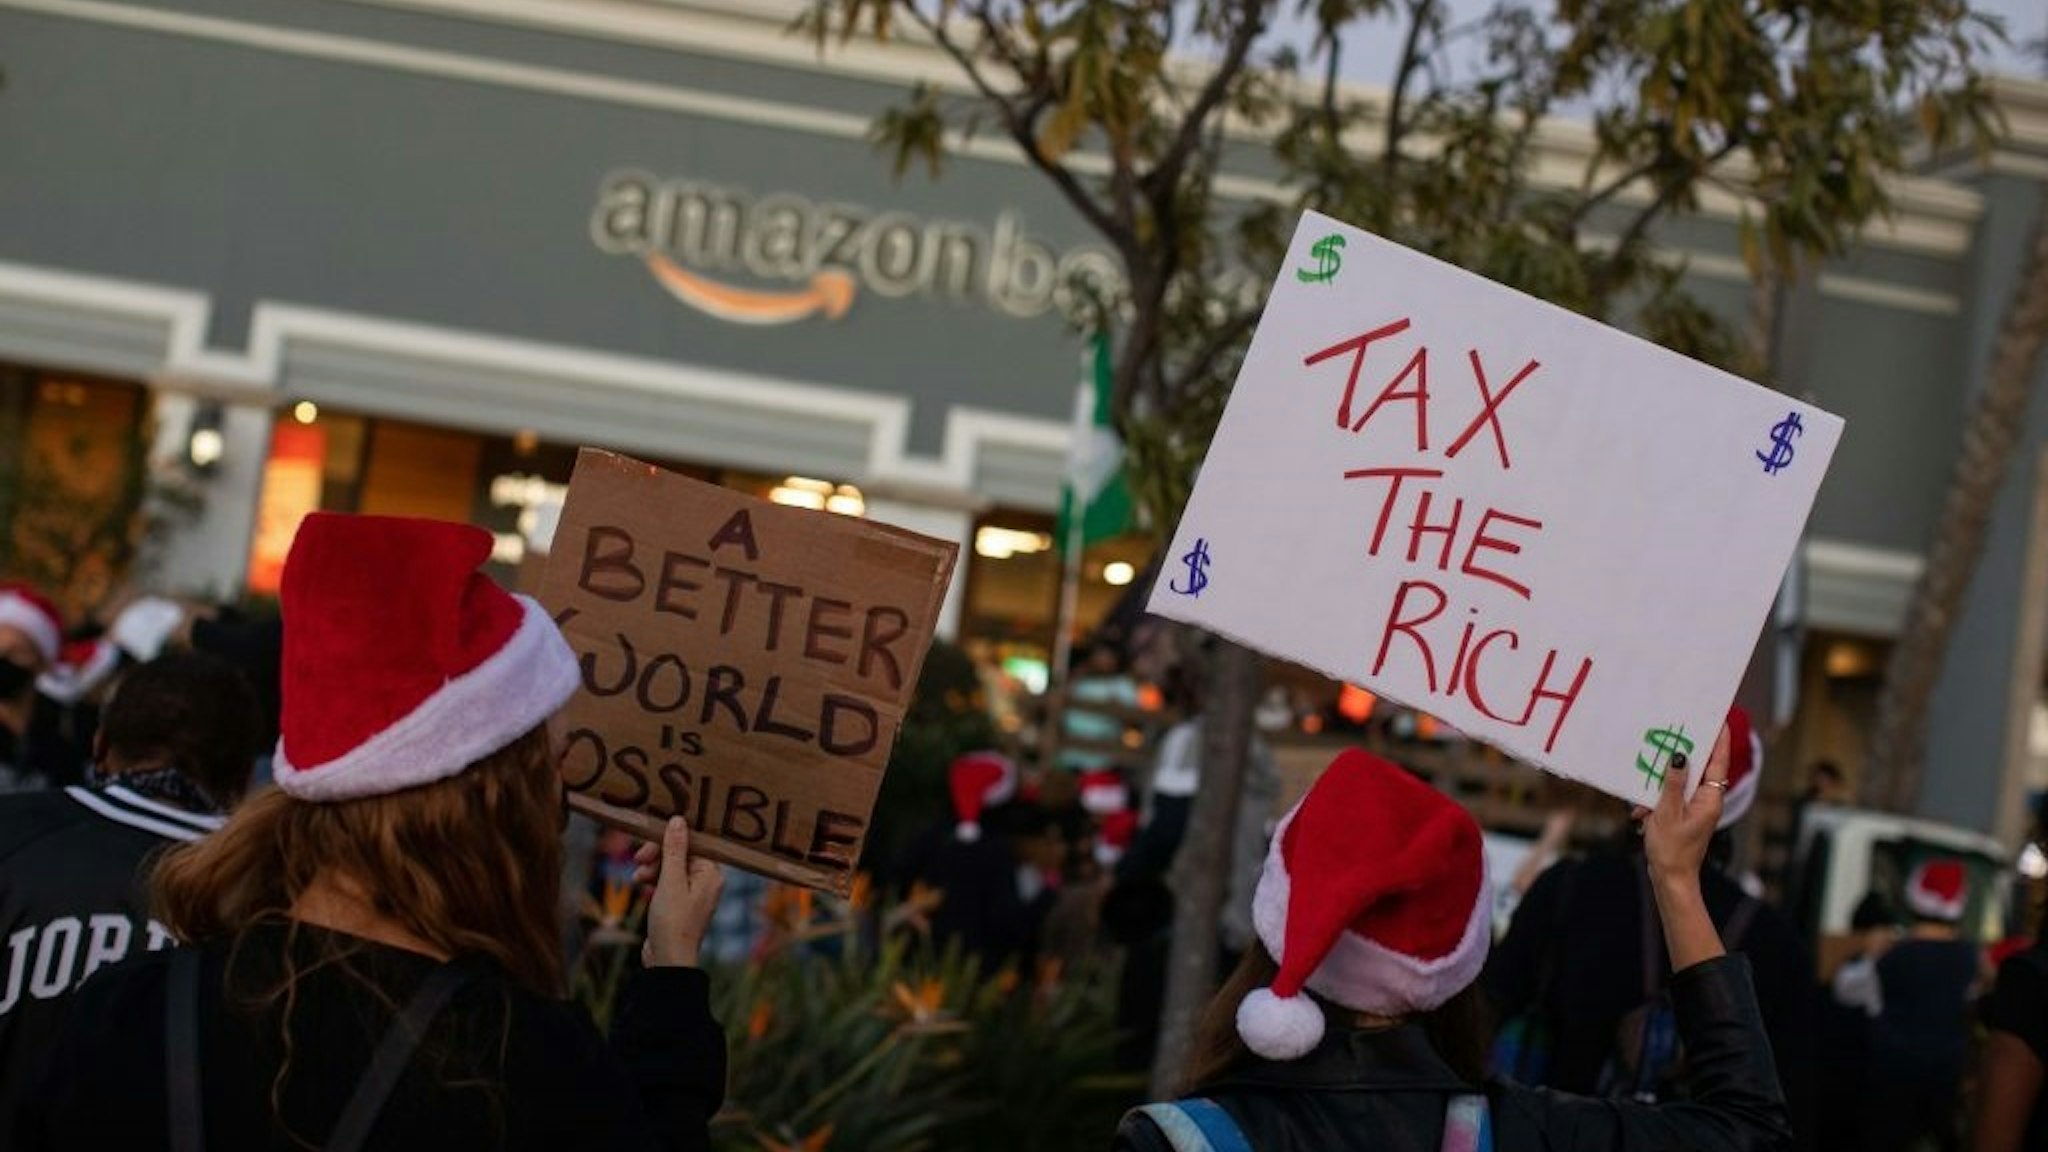 Protesters wearing Santa's hats hold signs as they demonstrate in front of the Amazon Book Store in the Waterside shopping center in the Marina Del Rey neighborhood of Los Angeles during a Black Lives Matter rally to demand social justice on December 19, 2020.